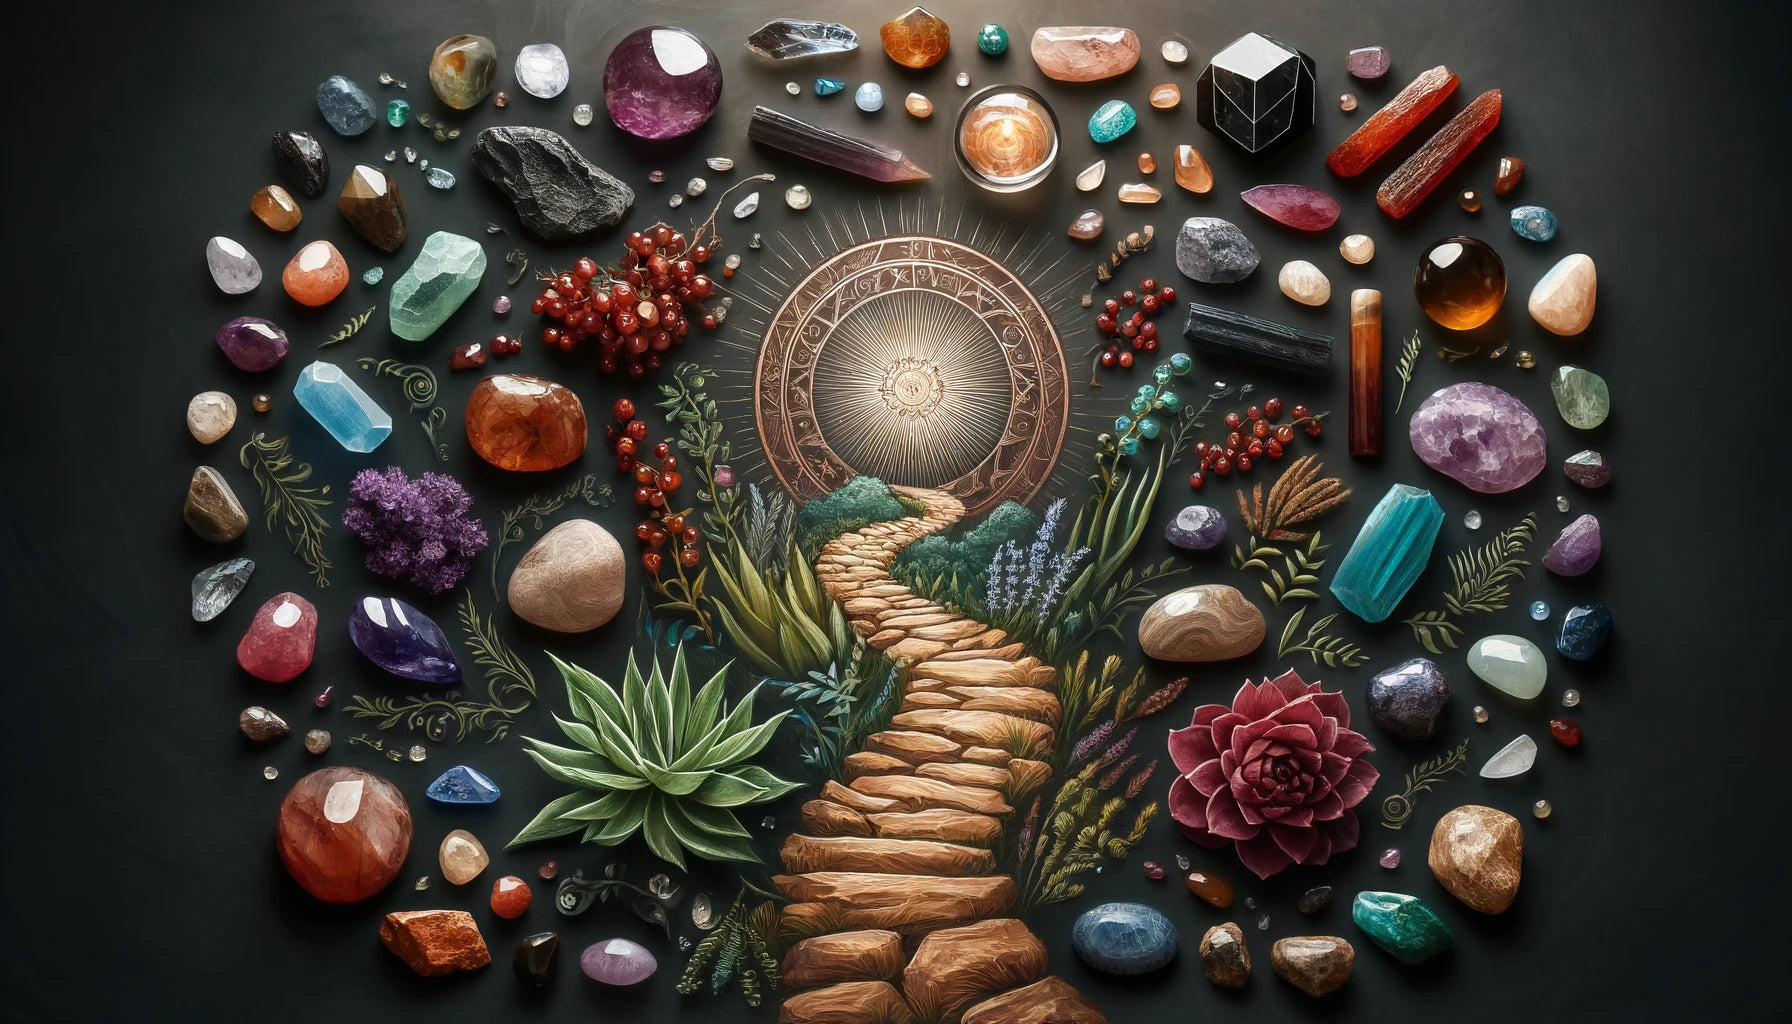 Finding Your Life Purpose with the Help of Healing Stones